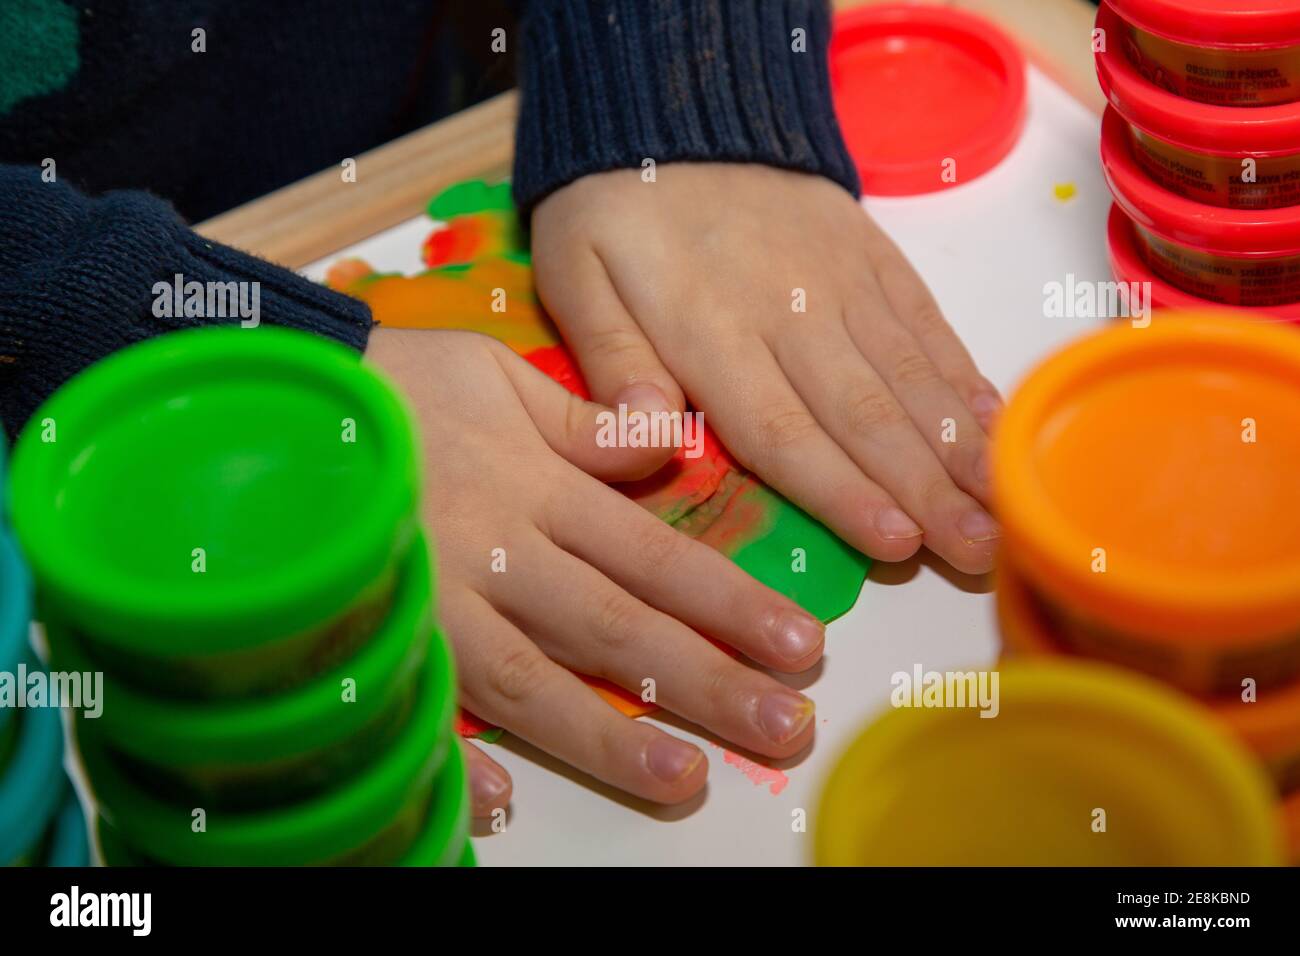 A child playing with Play Doh modelling clay at a table Stock Photo